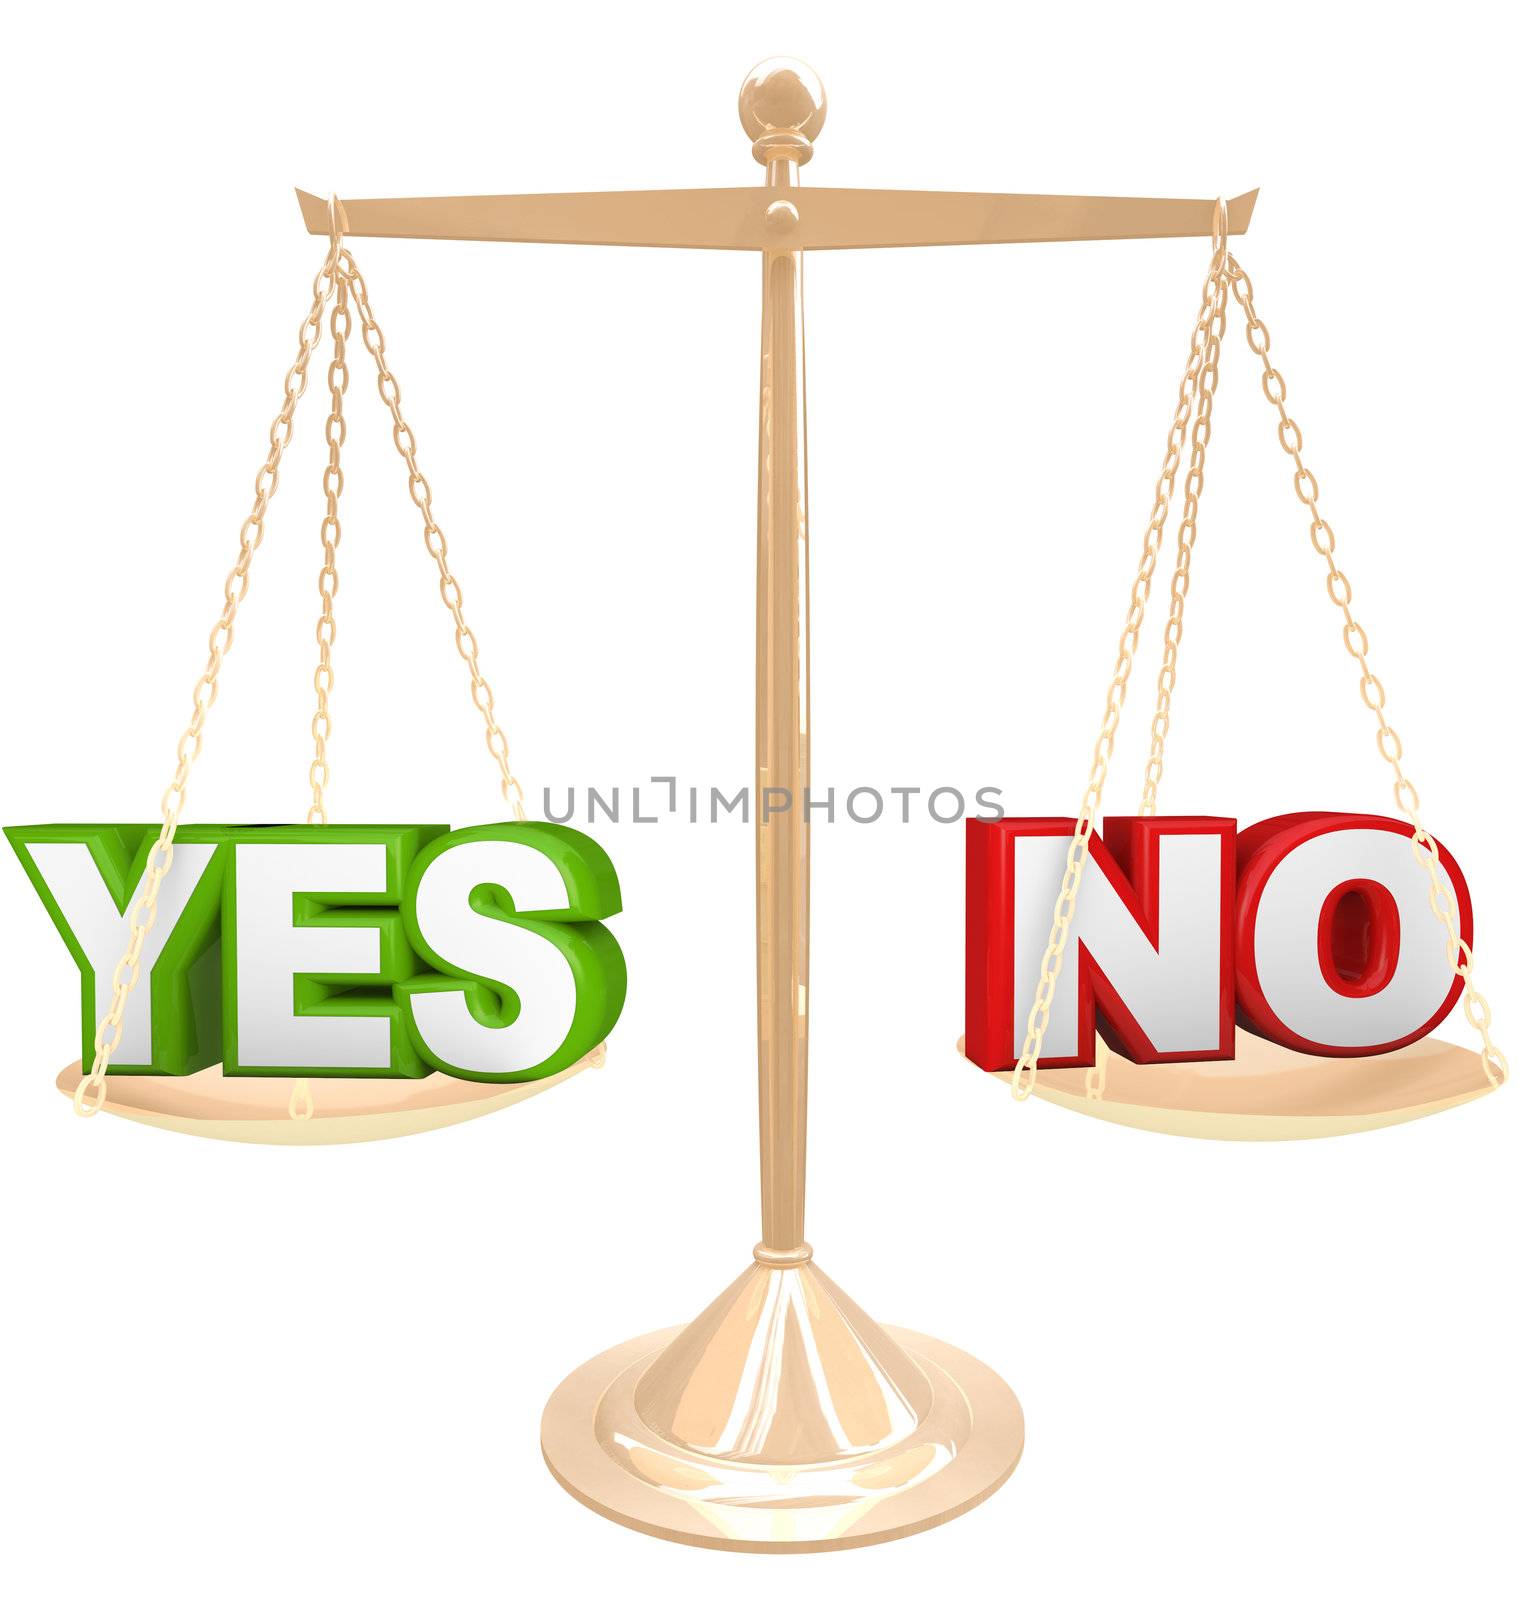 Yes Vs No Words on Scale Weighing Options to Answer by iQoncept